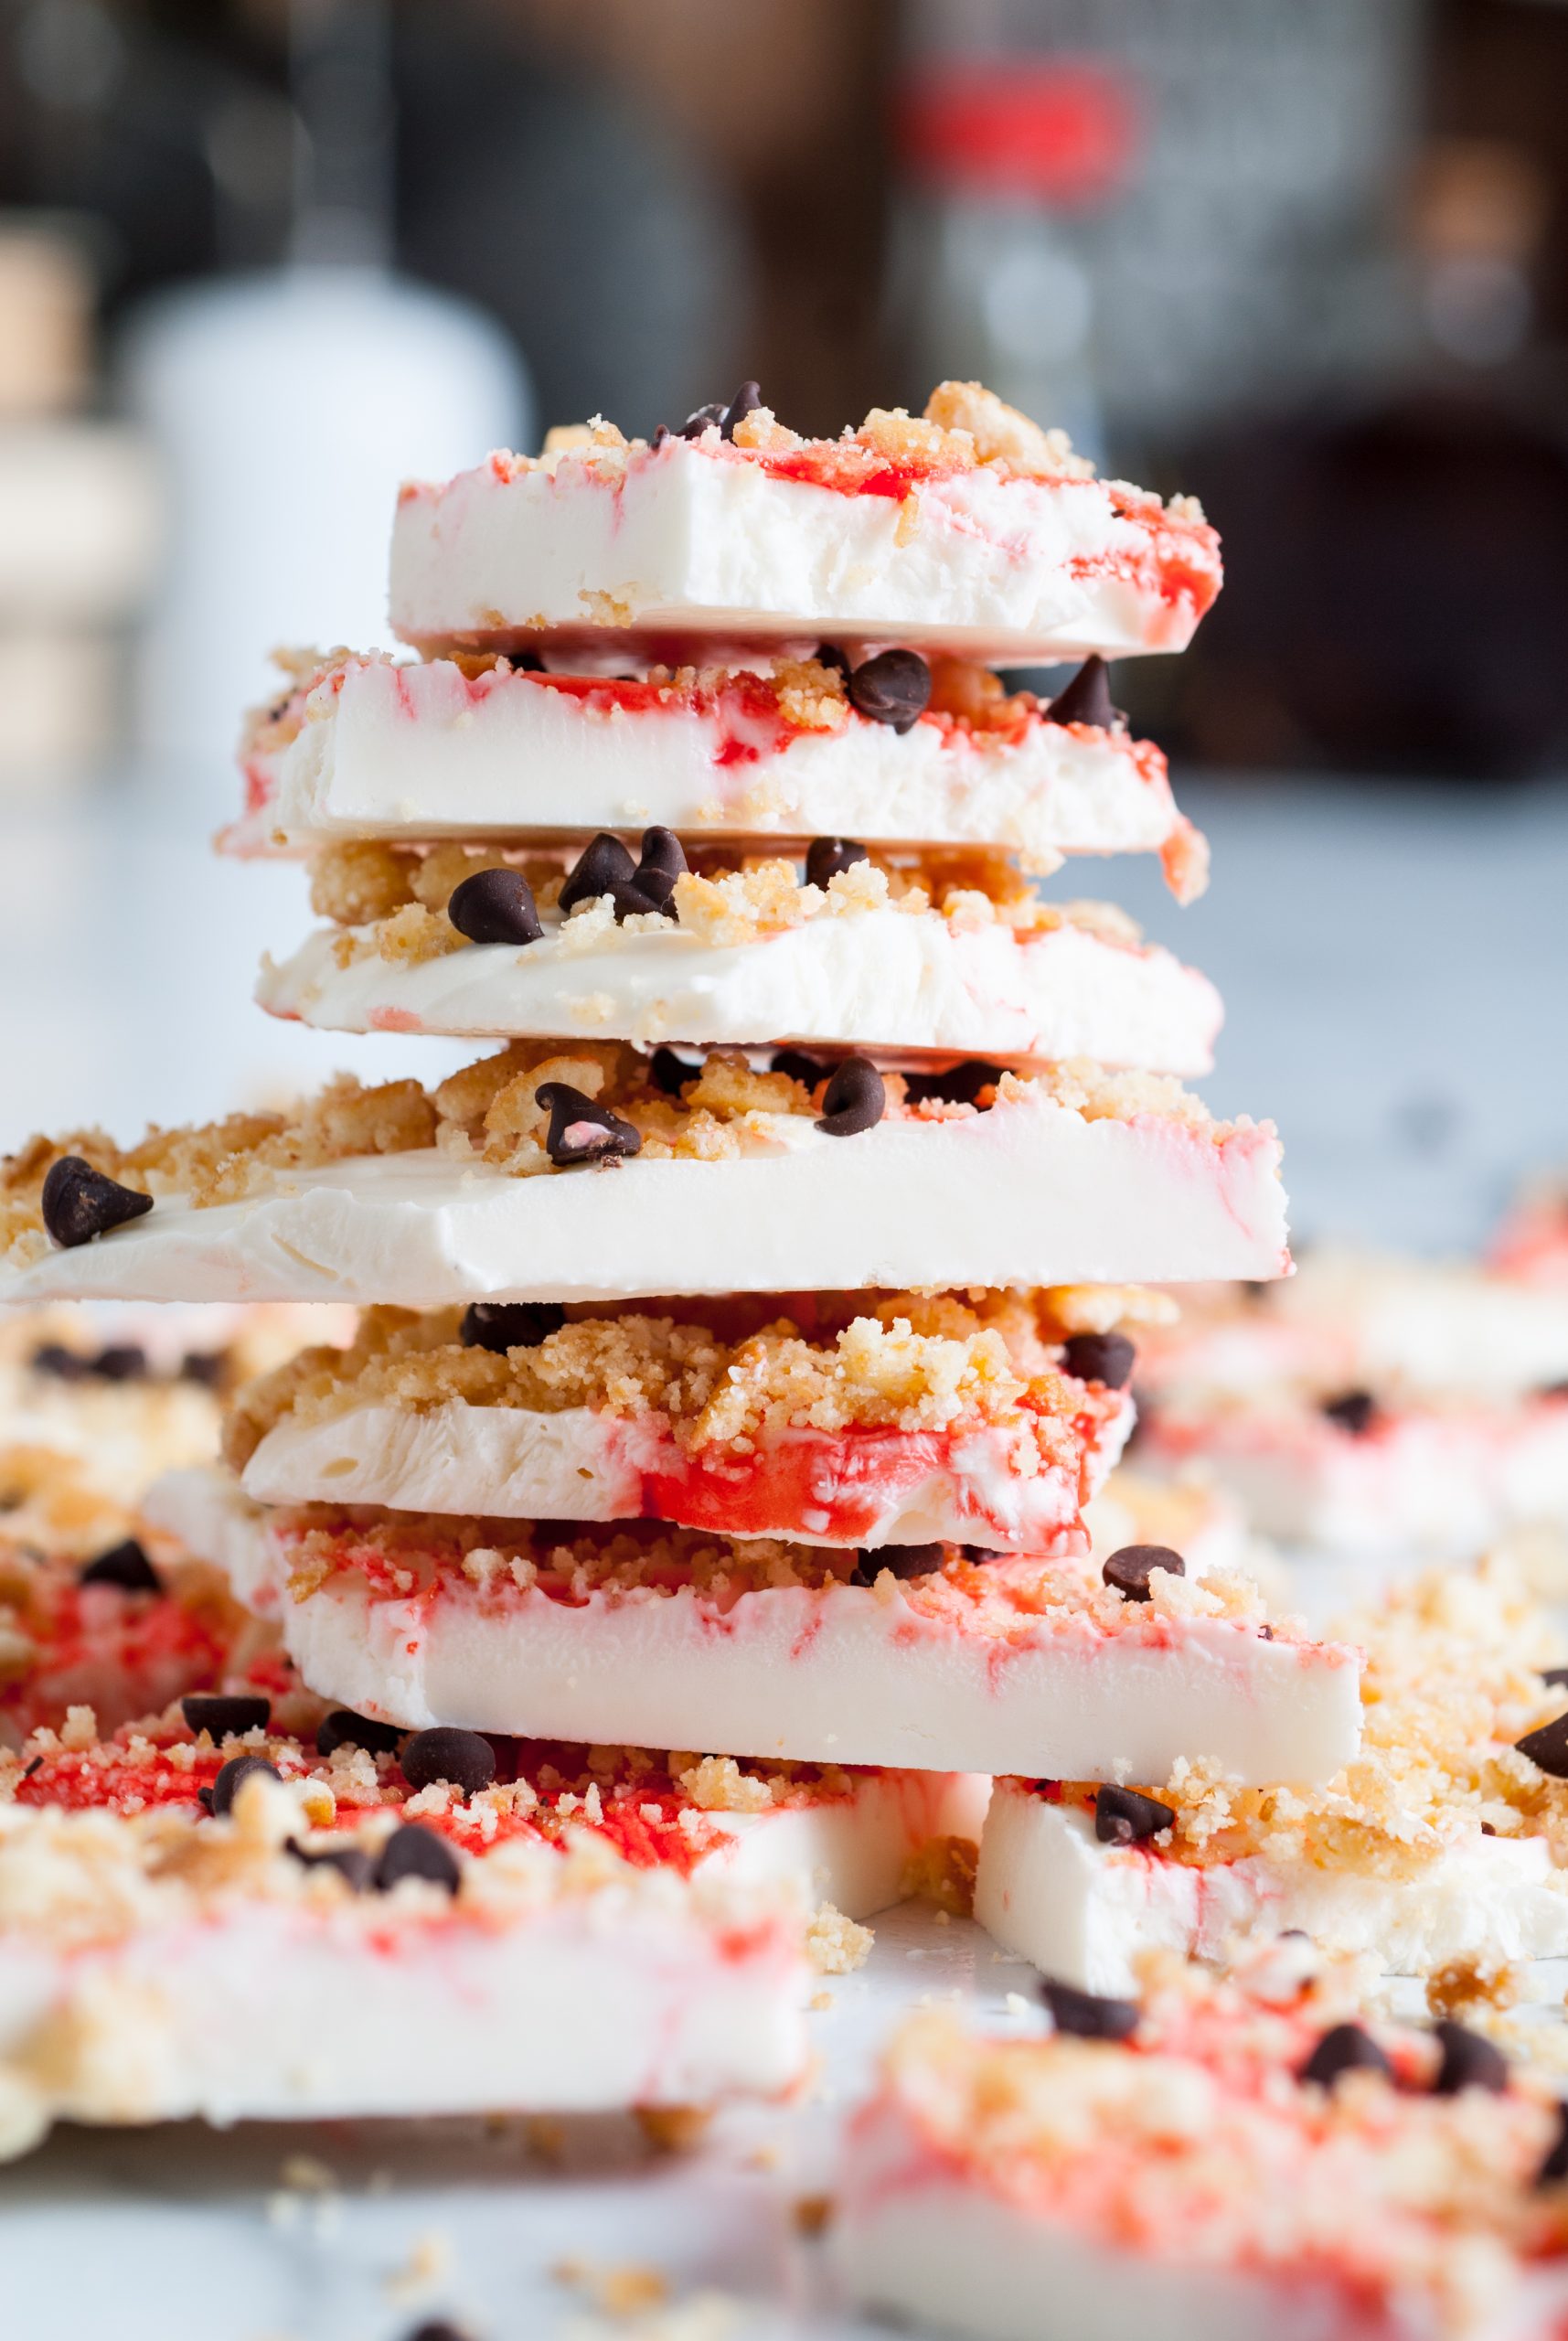 A stack of white chocolate bark pieces with red swirls, chocolate chips, and crumbly toppings.